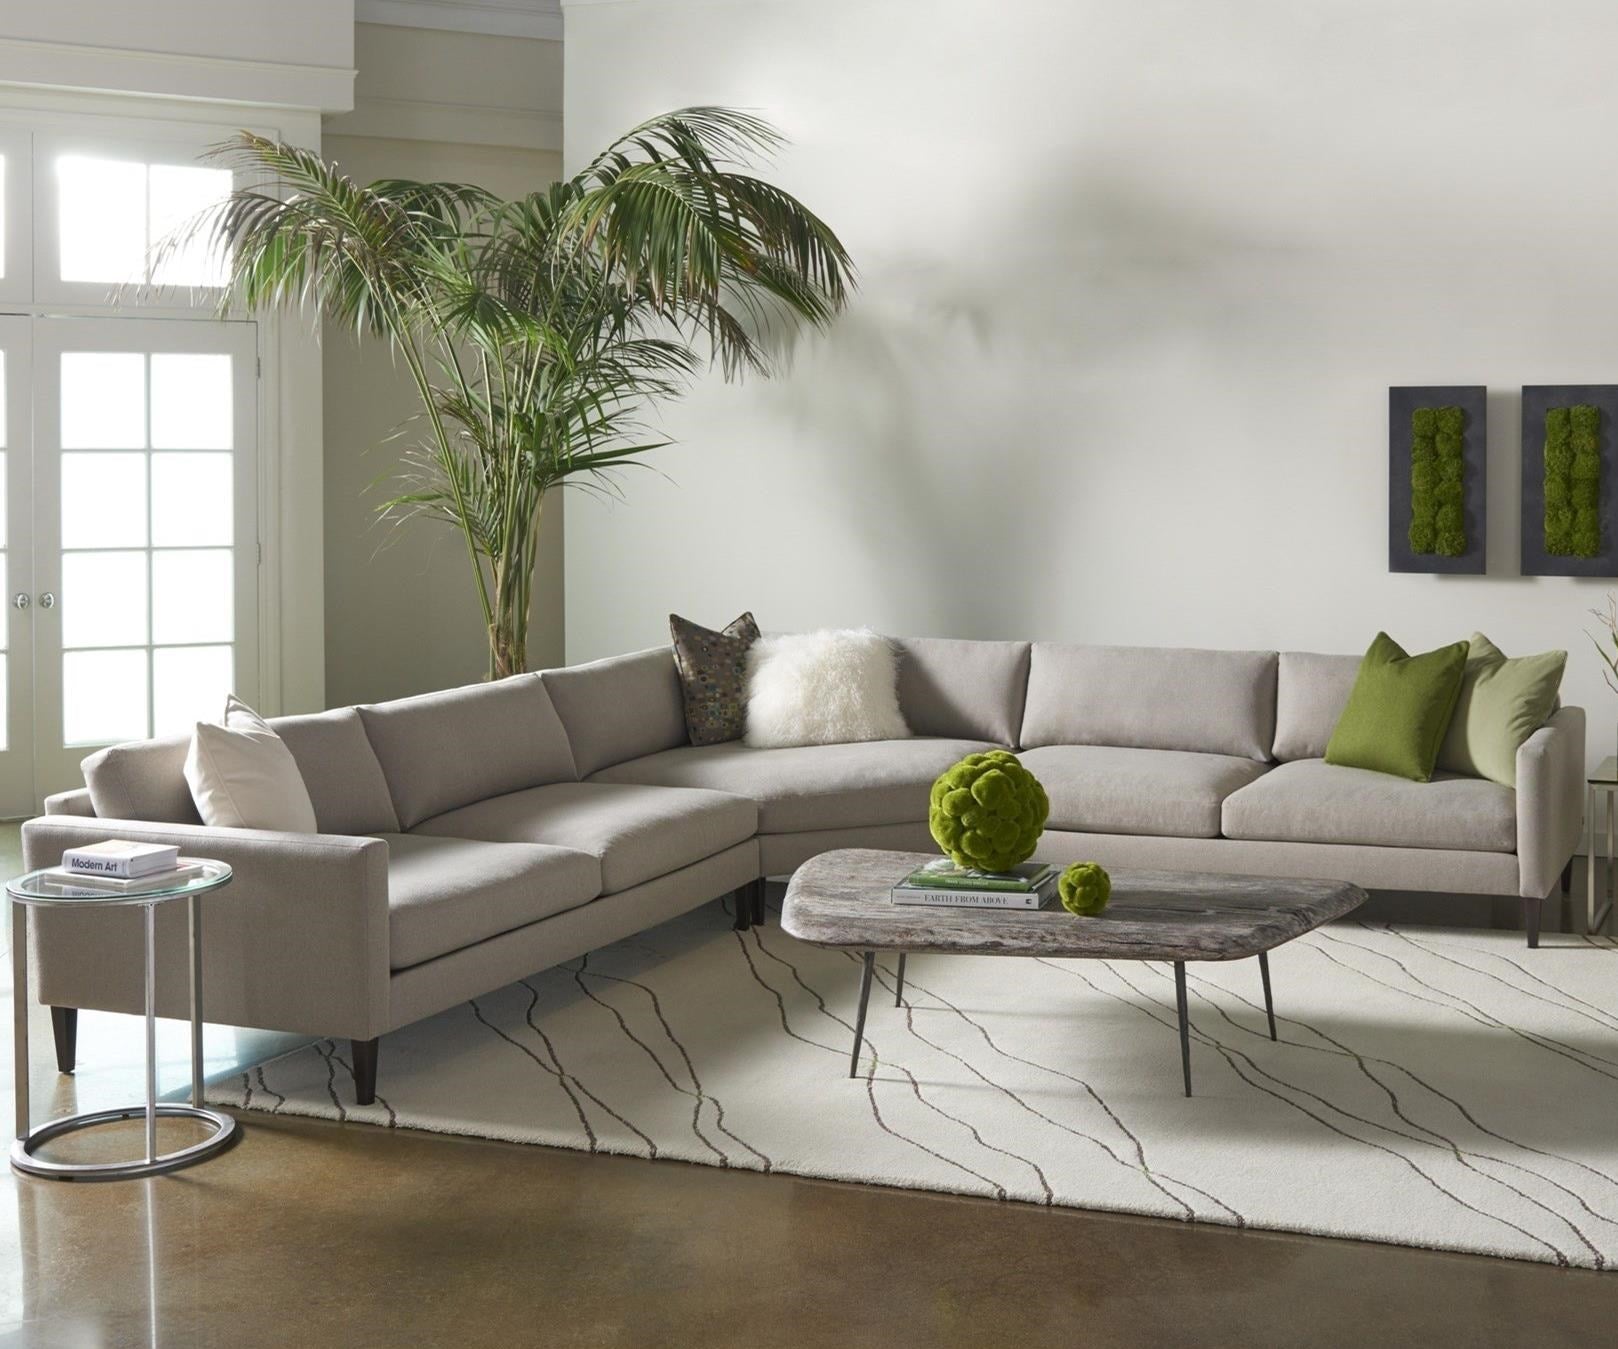 A modern living room features a light-gray sectional sofa adorned with green and white throw pillows. A wooden coffee table holds a decorative green sphere. Potted palm trees and framed green art add a touch of nature. The room has a rug with wavy lines and a side table.